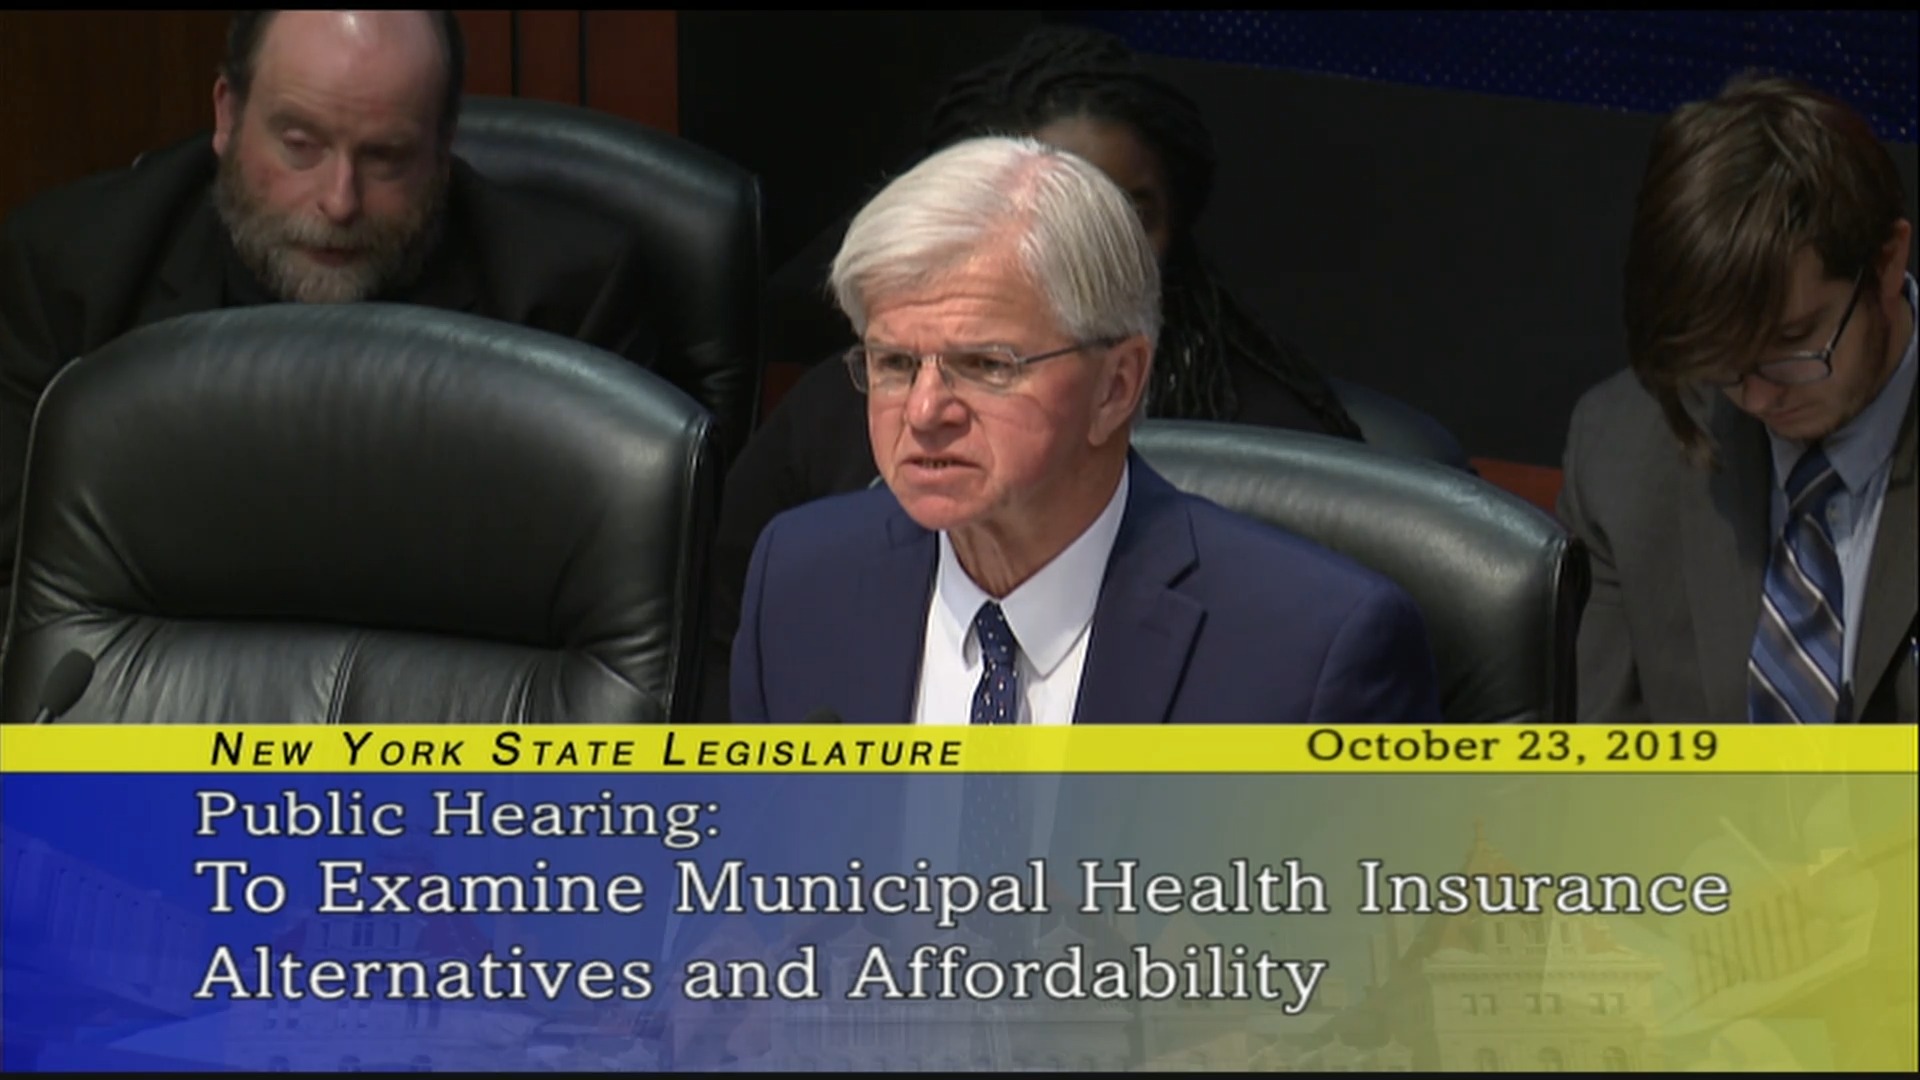 Public Hearing on Municipal Health Insurance Alternatives and Affordability